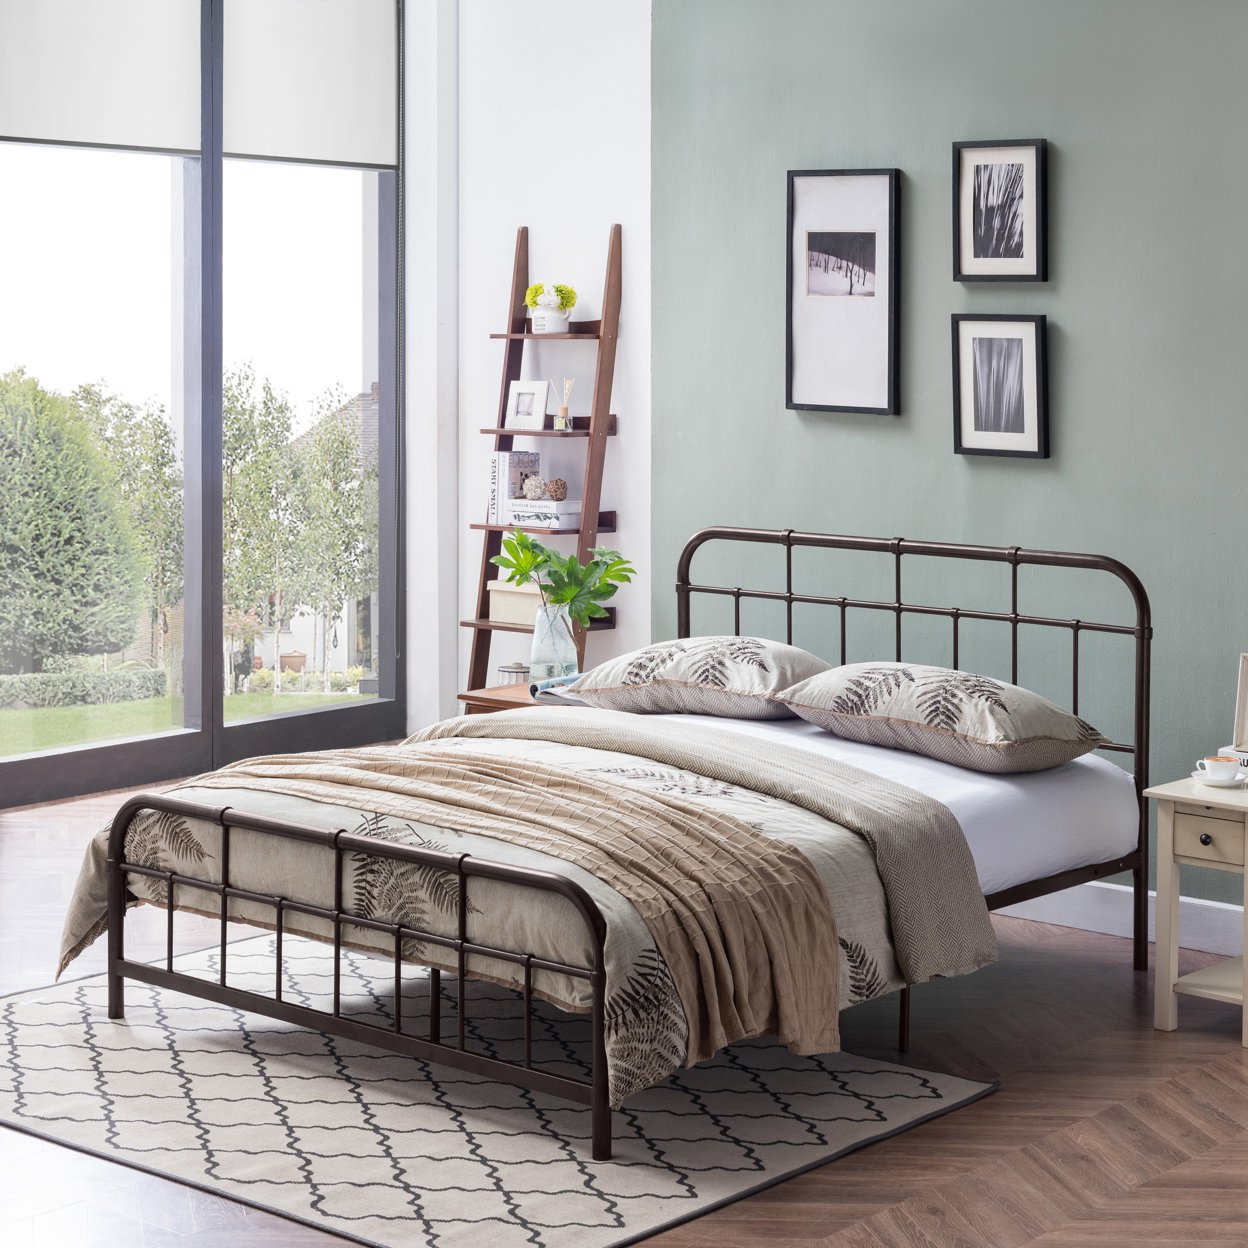 Sylvia Queen-Size Iron Bed Frame, Minimal, Industrial - Hammered Copper